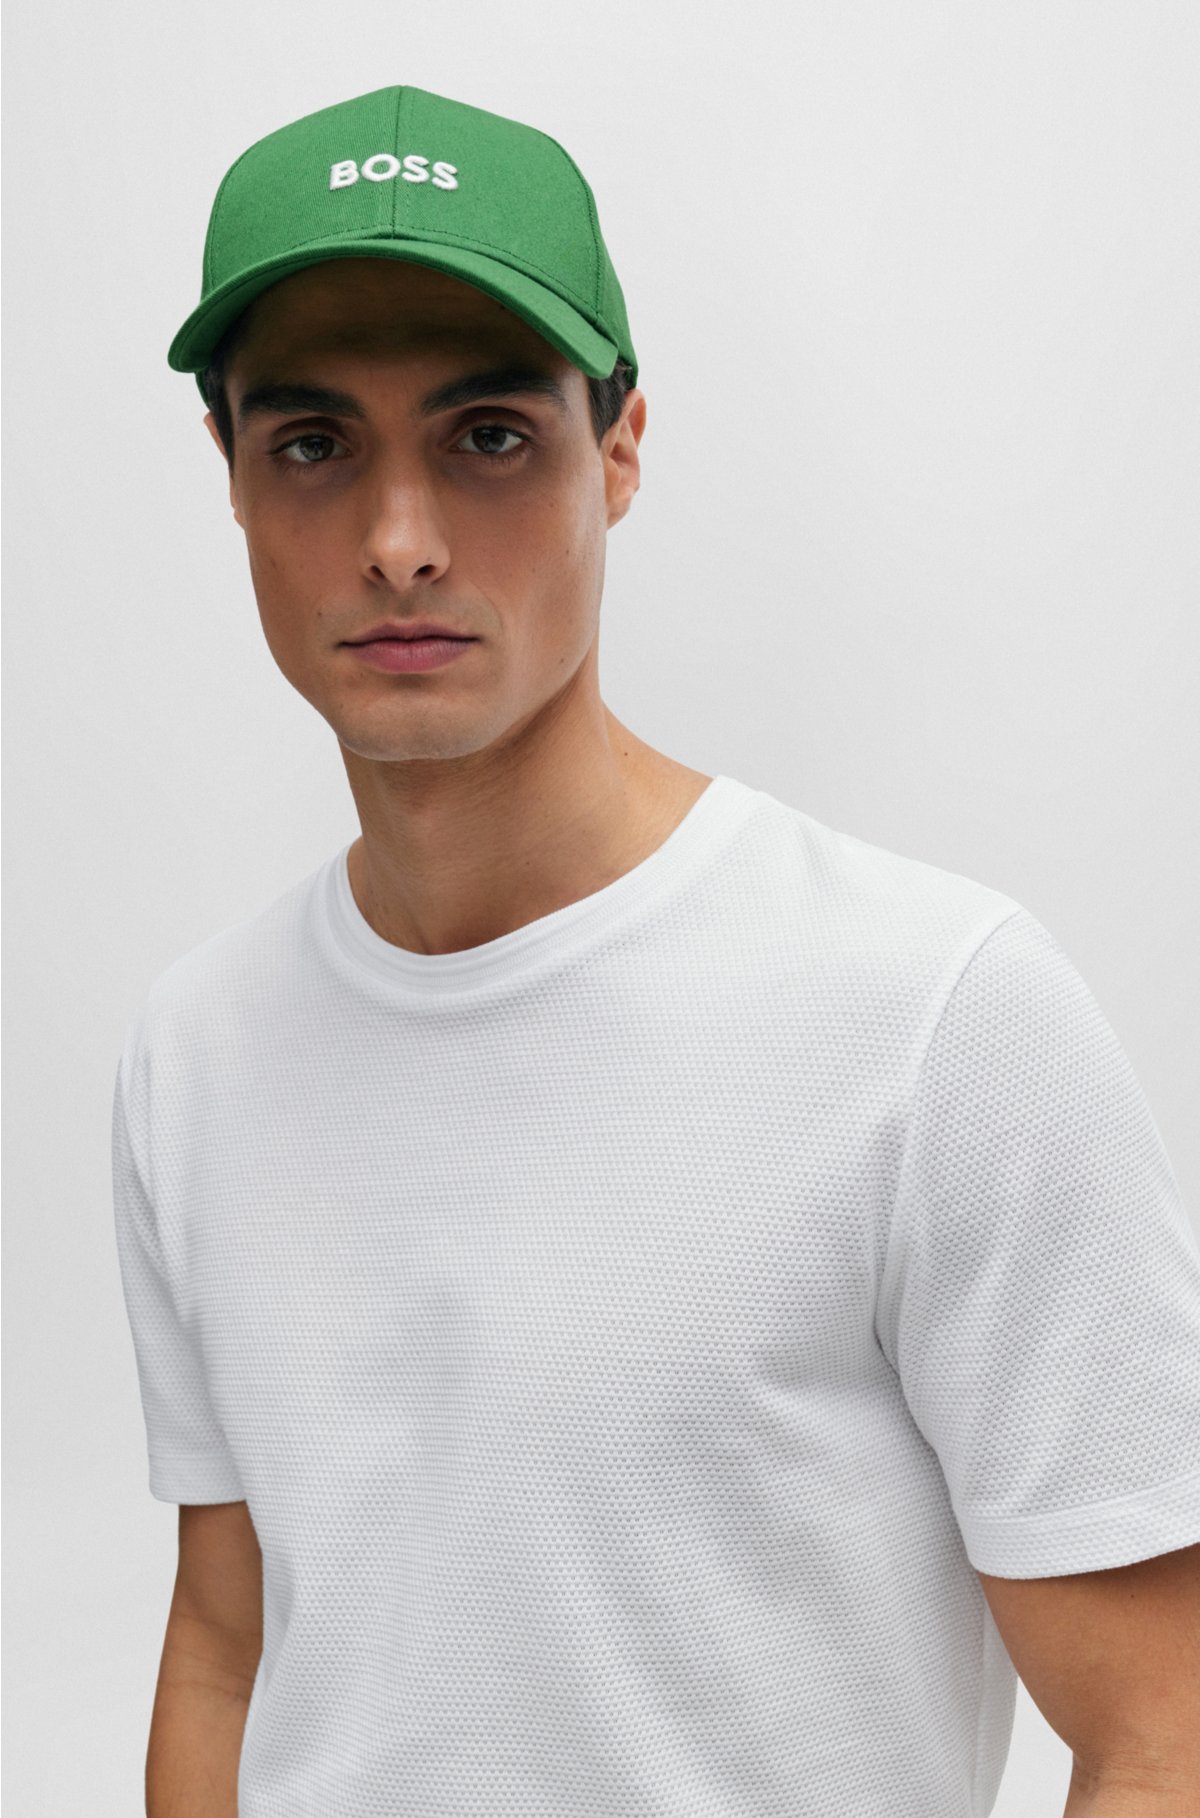 BOSS - Cotton-twill six-panel cap with embroidered logo